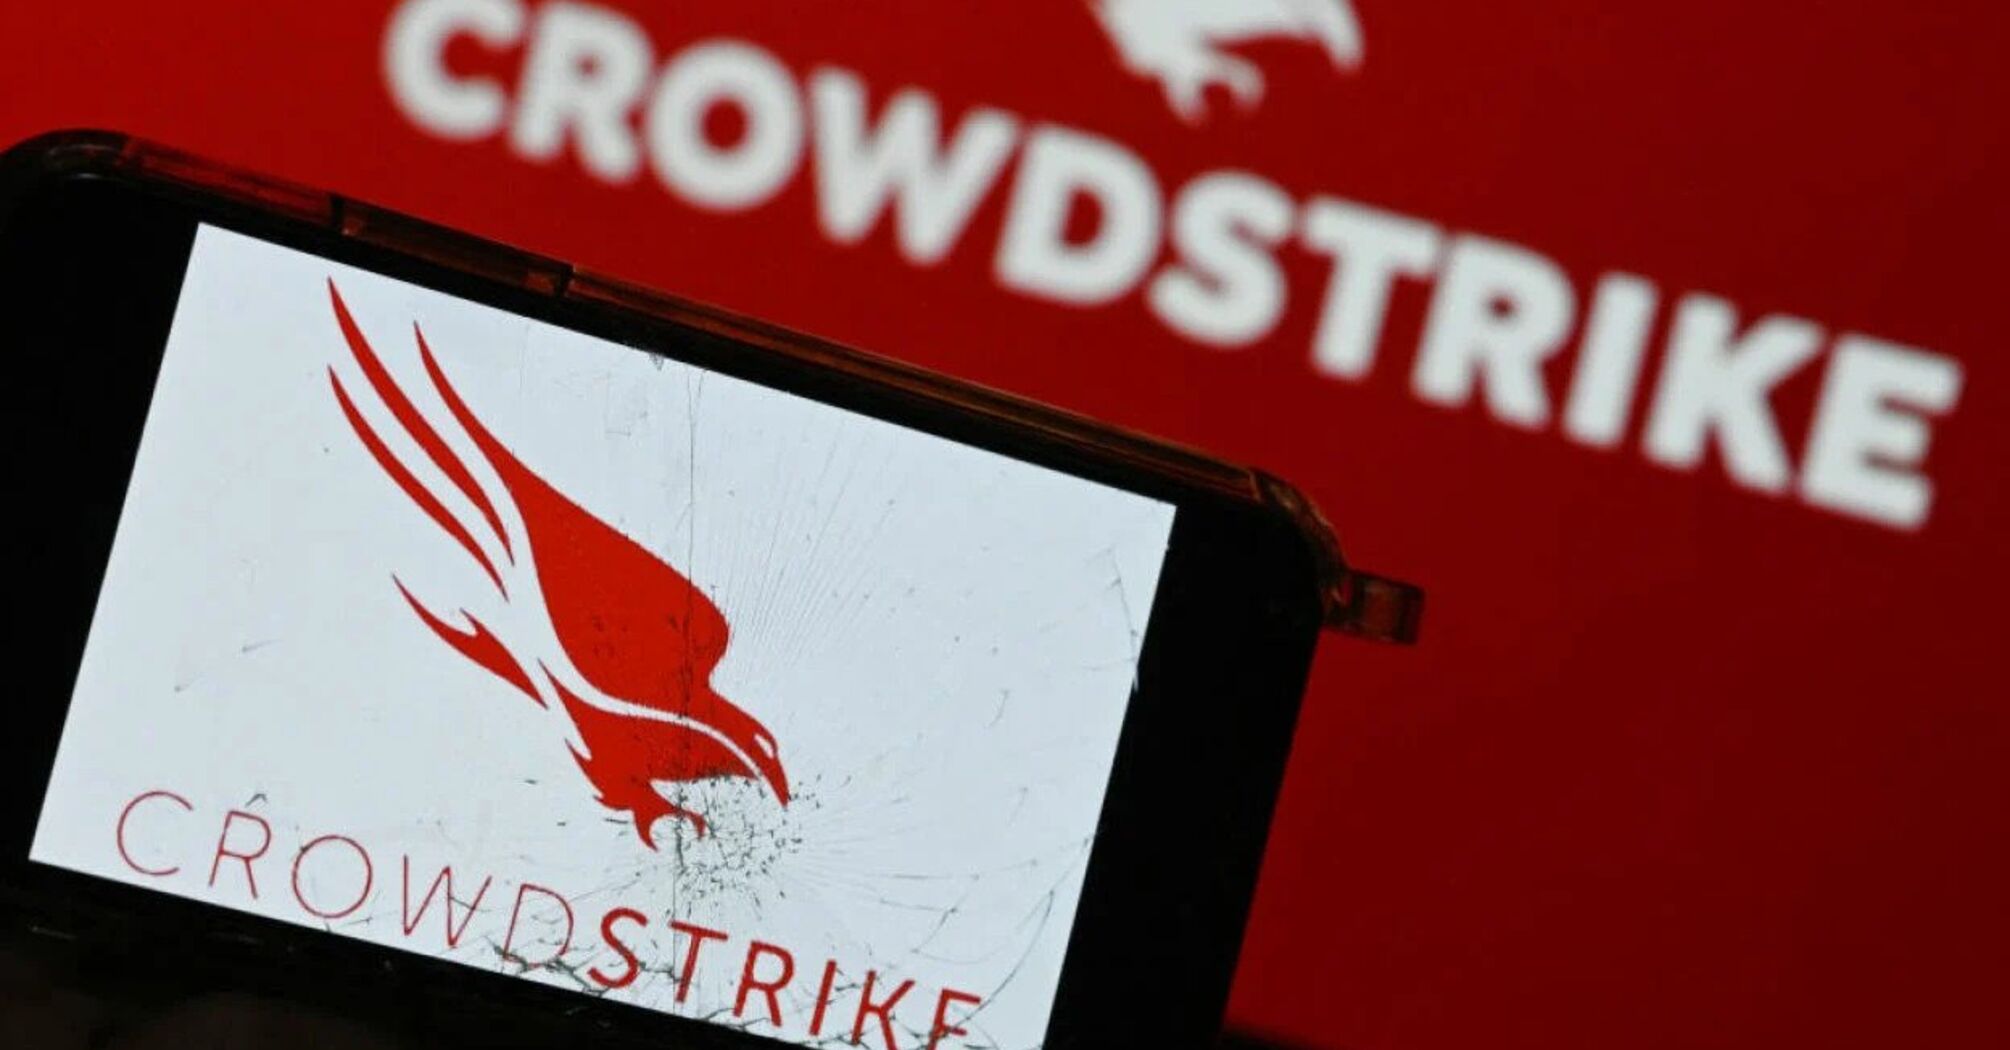 CrowdStrike Outage Causes $5.4 Billion Loss for Fortune 500 Firms - Parametrix